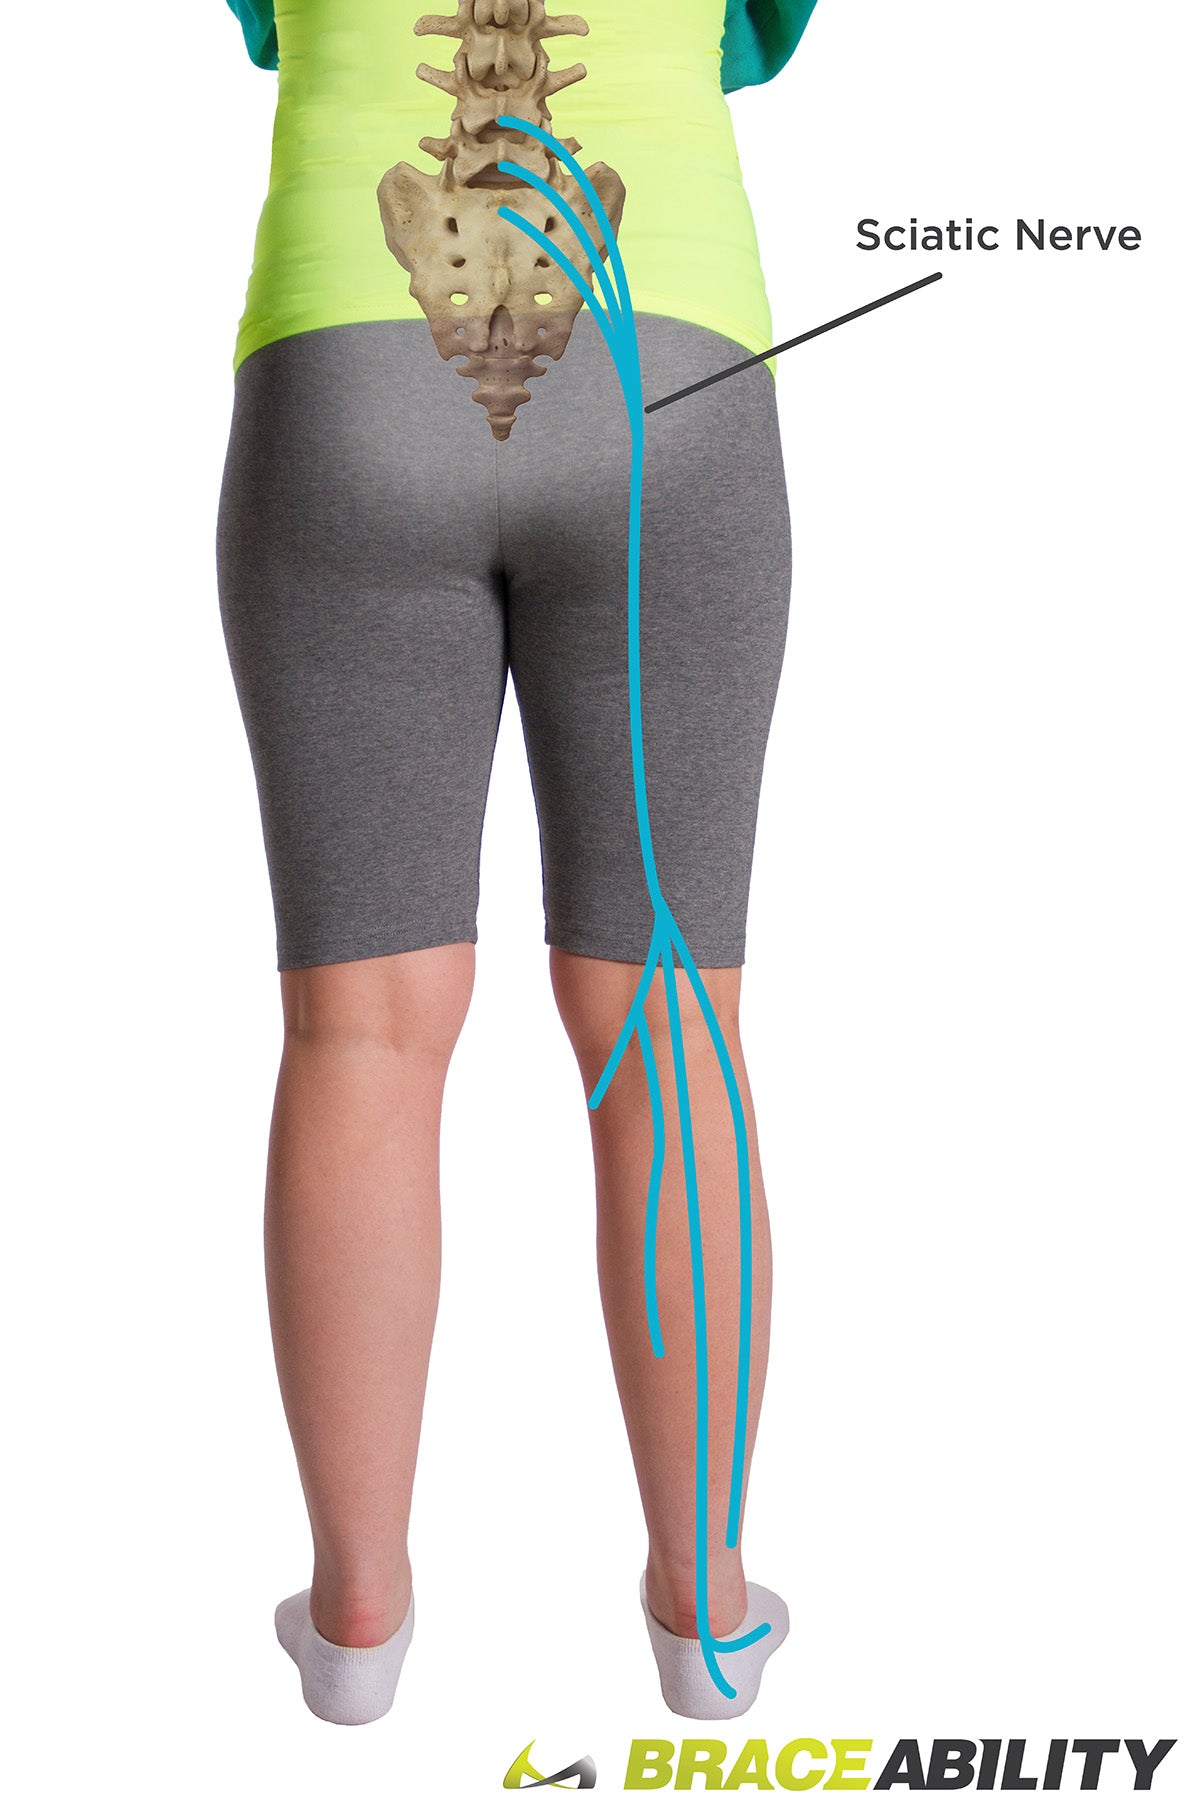 Where your sciatic nerve runs from your spine to your leg causing sciatica